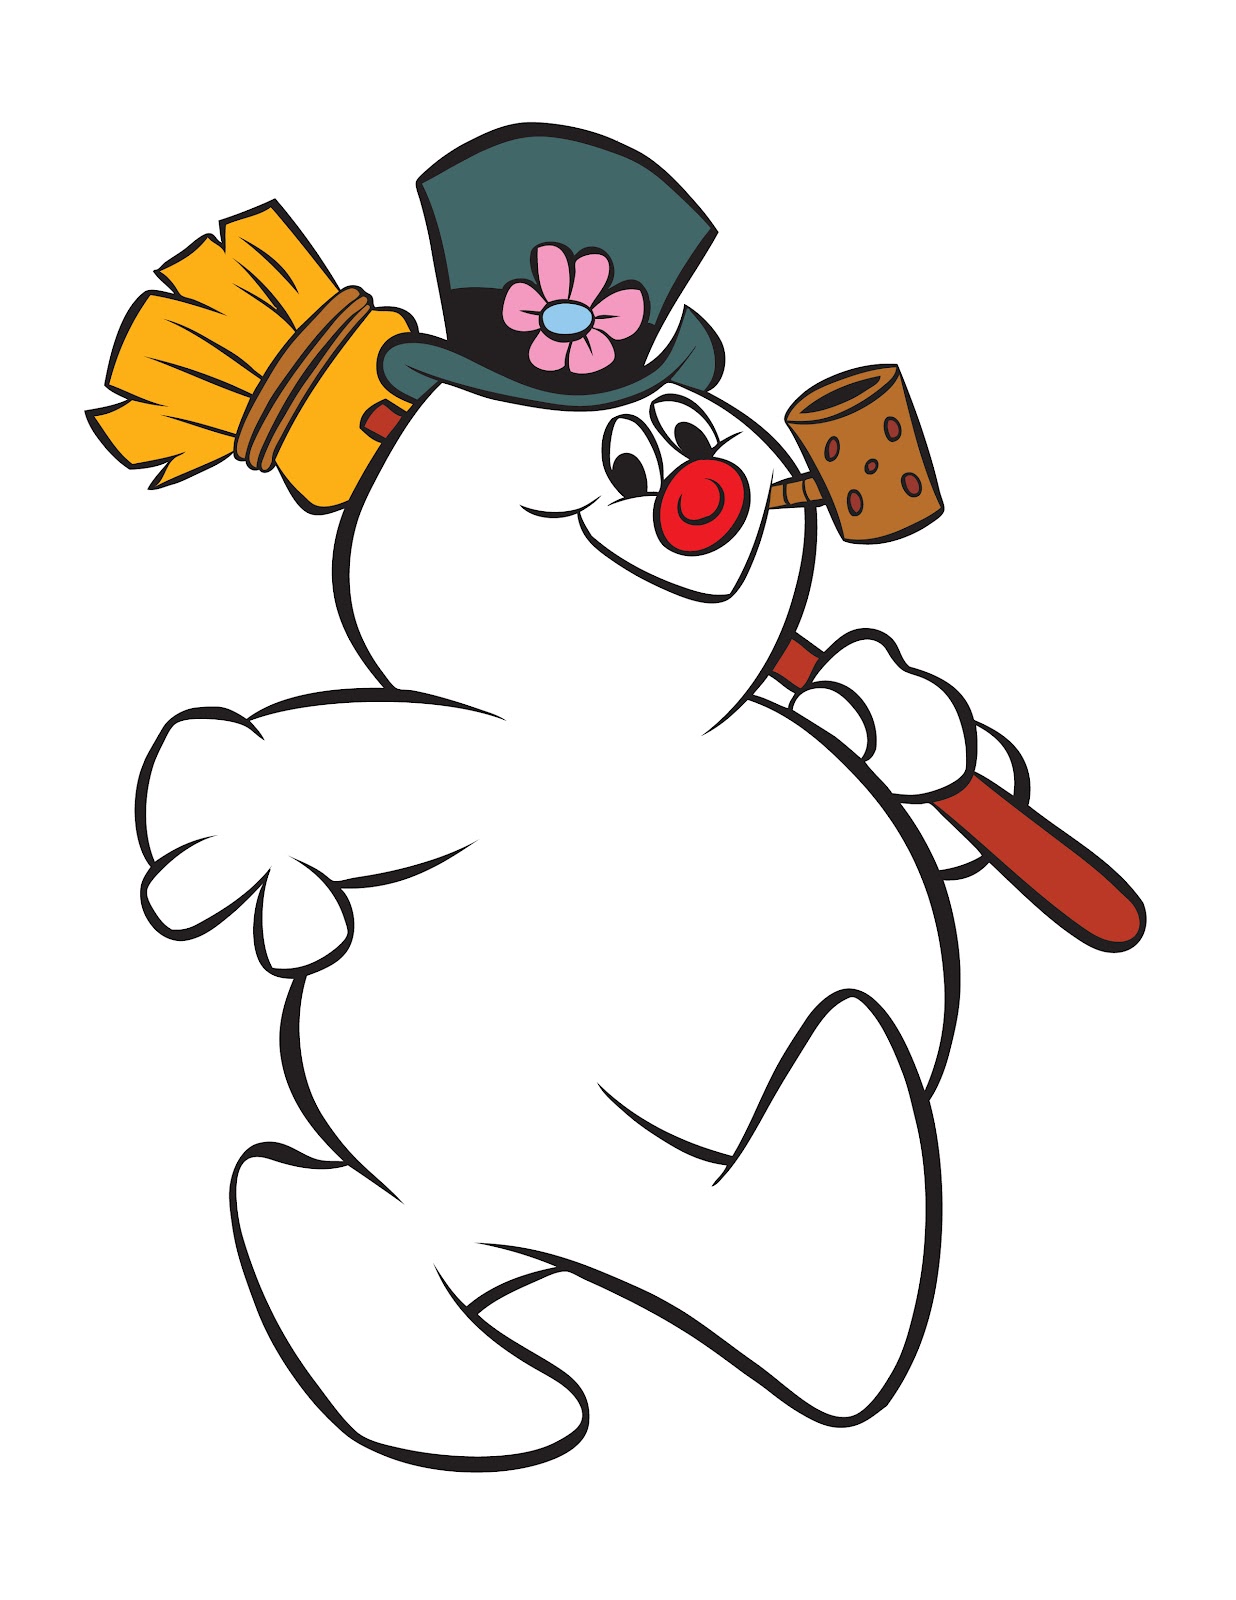 Re Do Character Art Inking Of Frosty The Snowman For A Rankin Bass